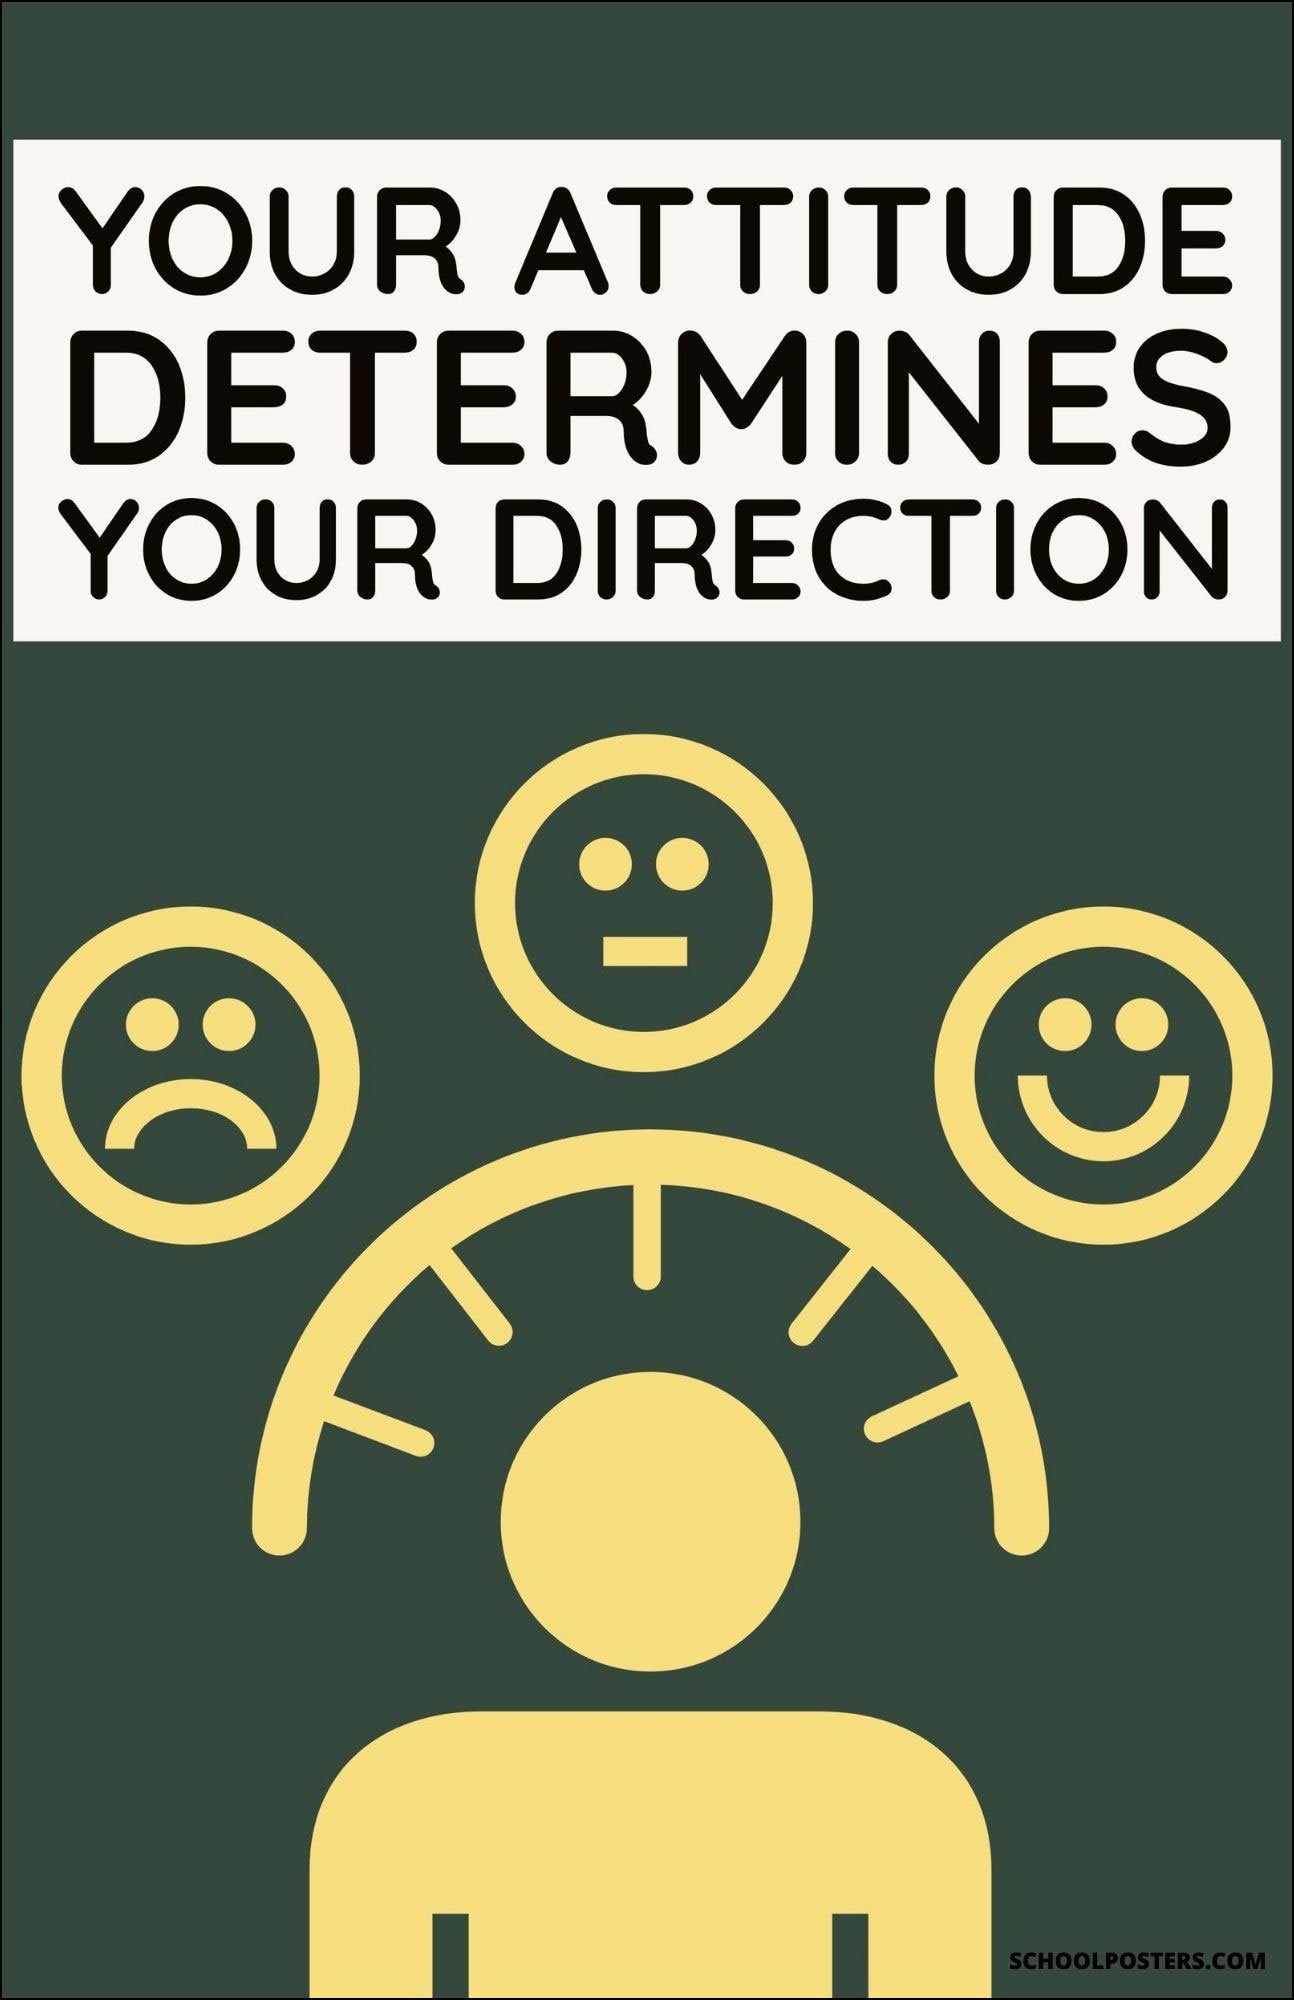 Your Attitude Determines Your Direction Poster